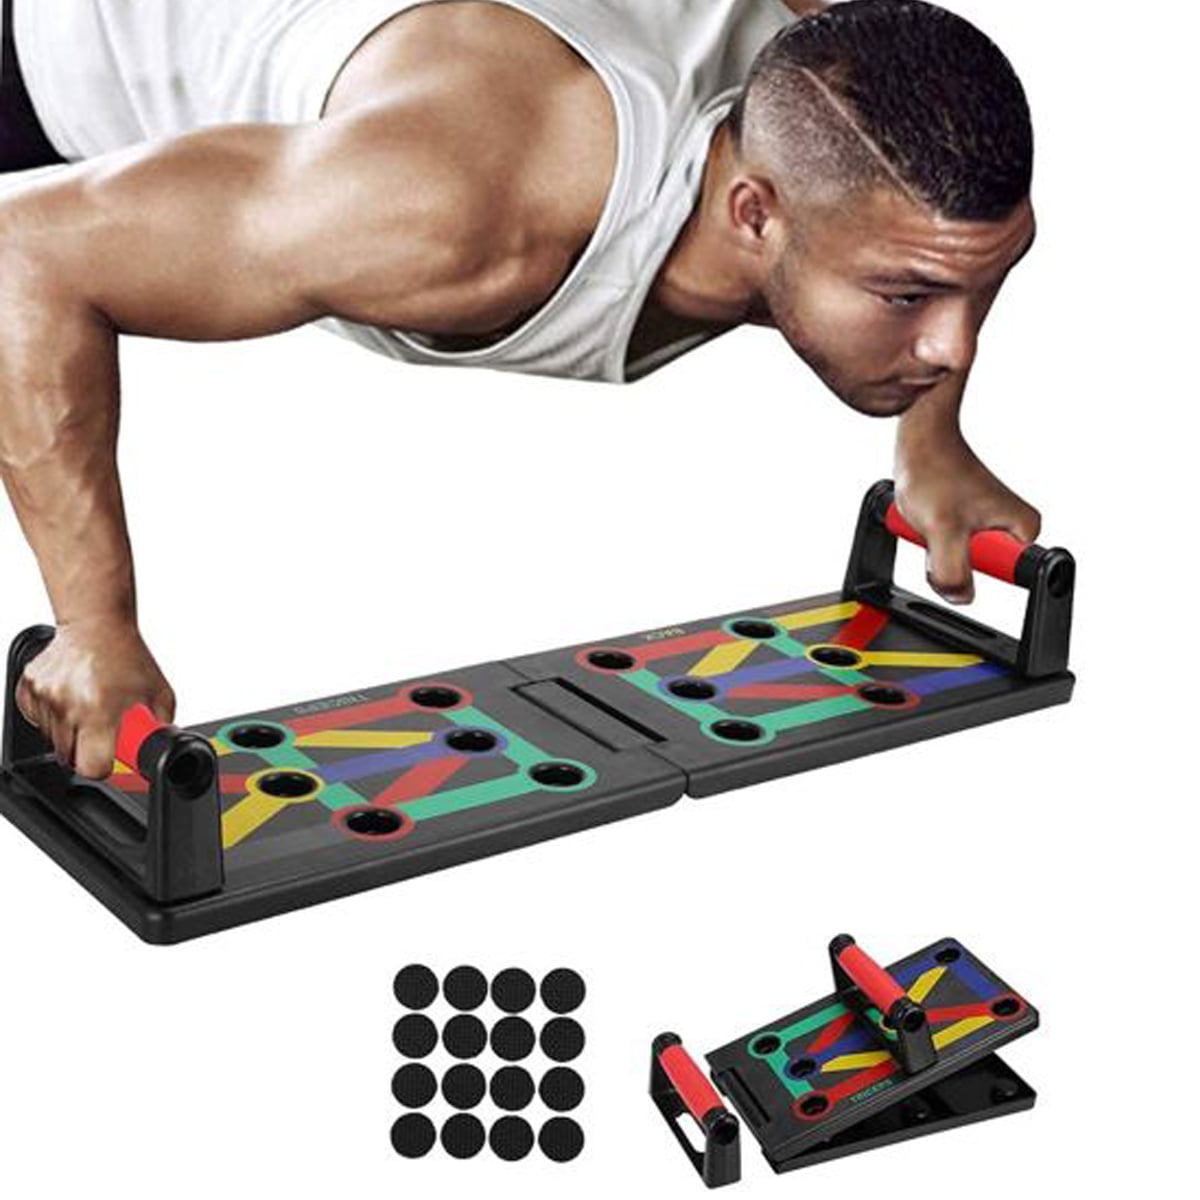 Push Up Bar 9 in 1 Multi-Function Push-Ups Provide Multiple Positions and Angles of Exercise Possible to Effectively Shape The Upper Body Muscles 